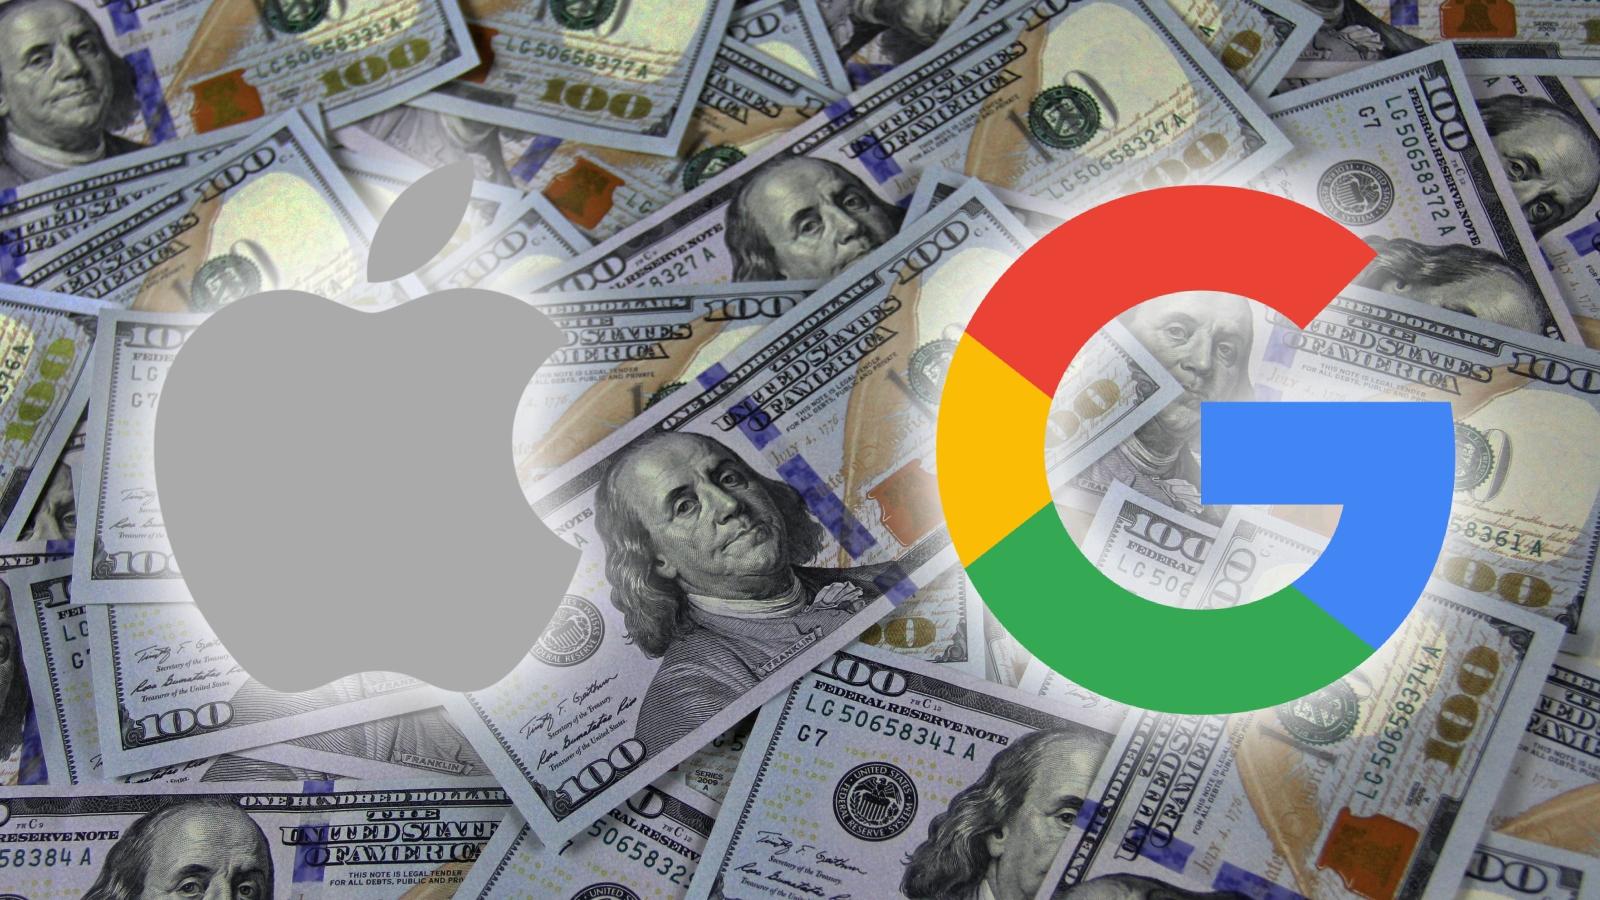 Apple and google logo on a background of USD